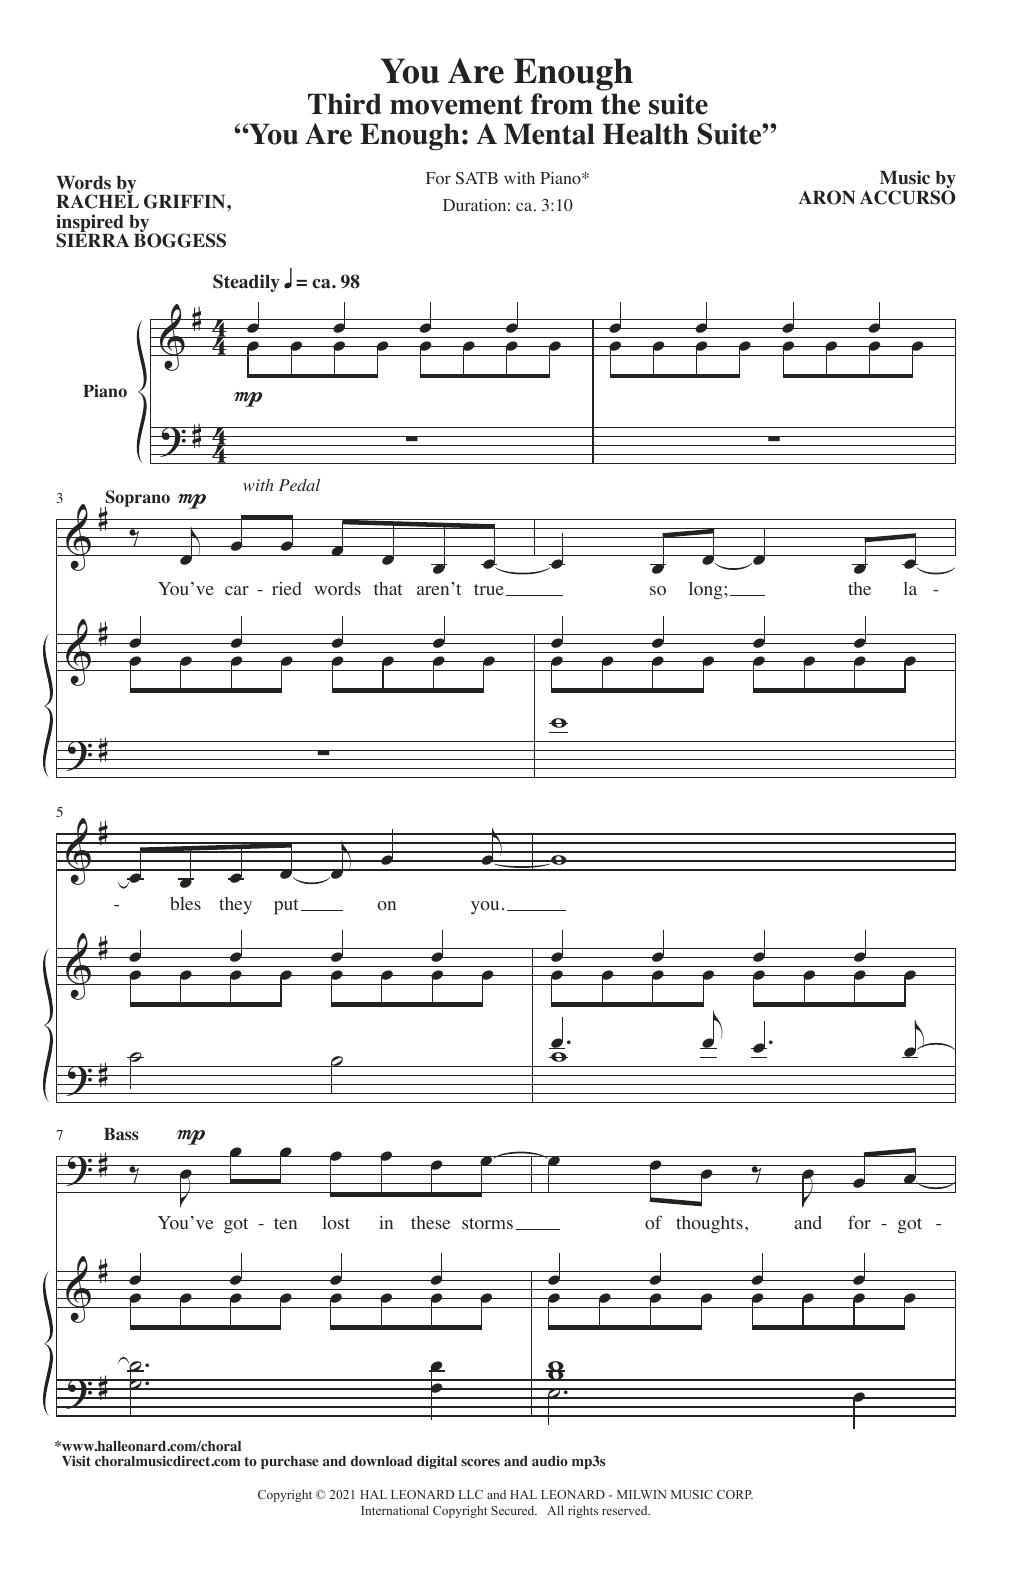 Download Rachel Griffin and Aron Accurso You Are Enough (Third movement from the Sheet Music